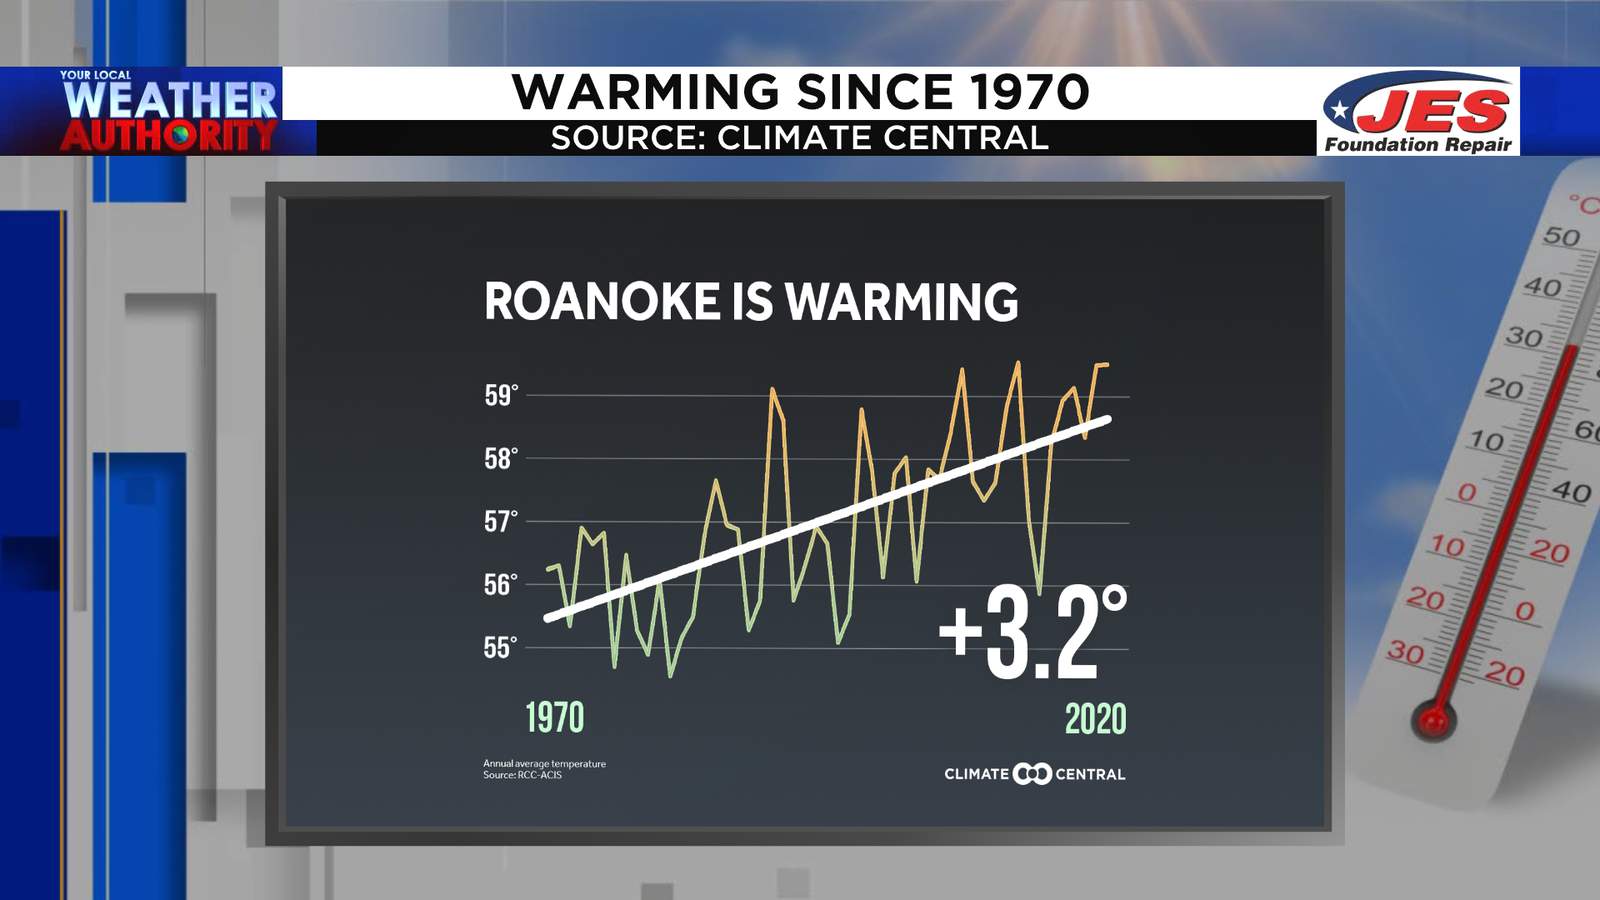 Our area has warmed 1-3 degrees since the first Earth Day in 1970